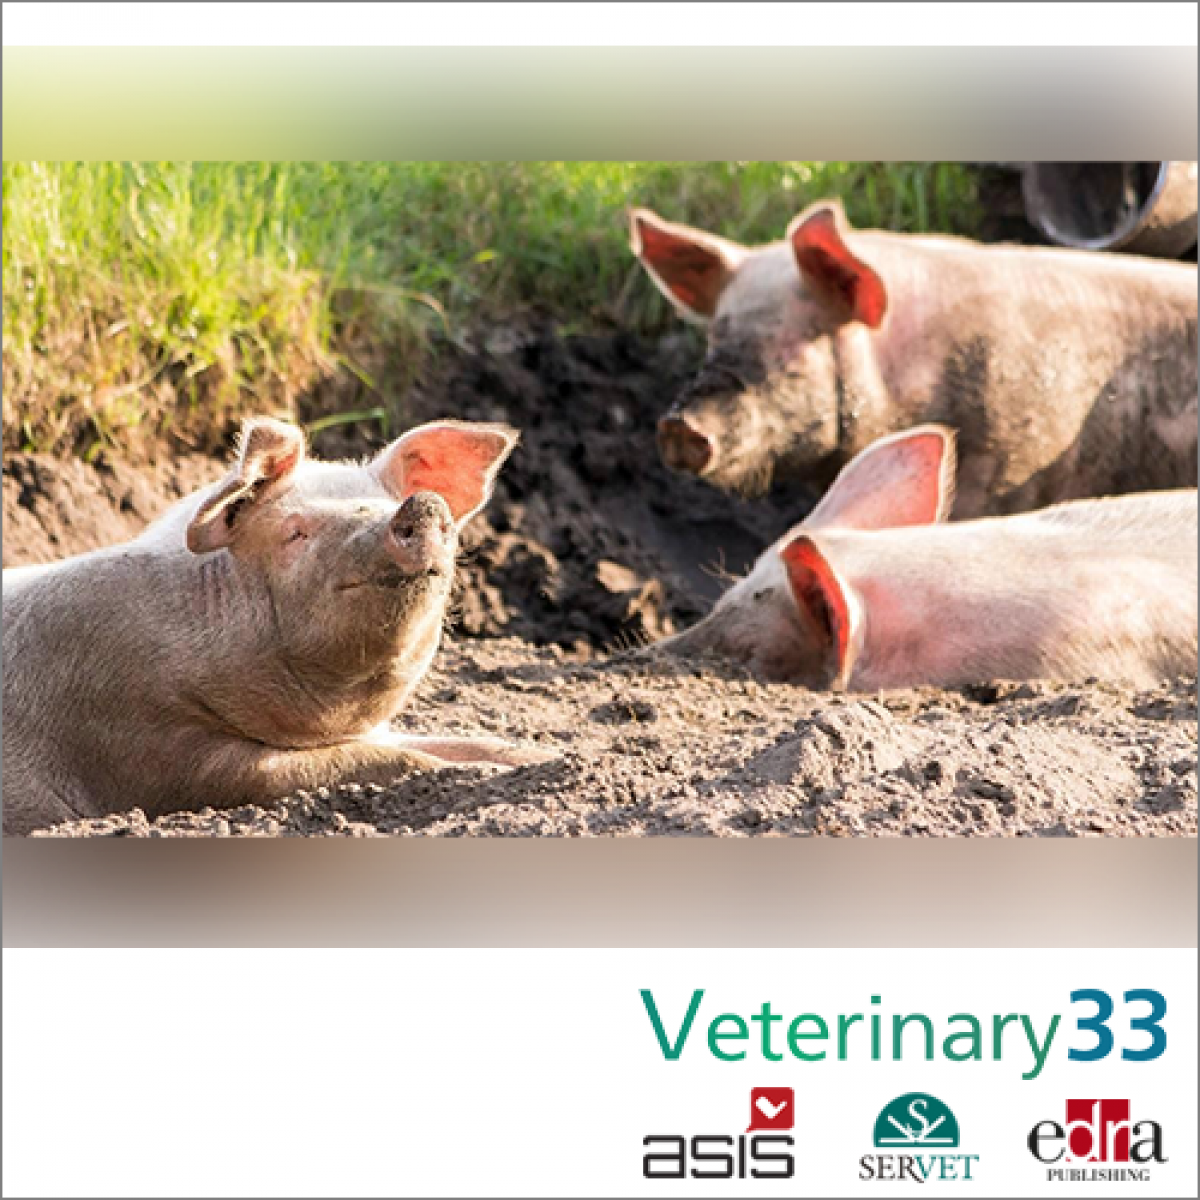 The first swine brucellosis diagnostic test without the risk of false  positives has a Spanish veterinary stamp | Veterinary 33